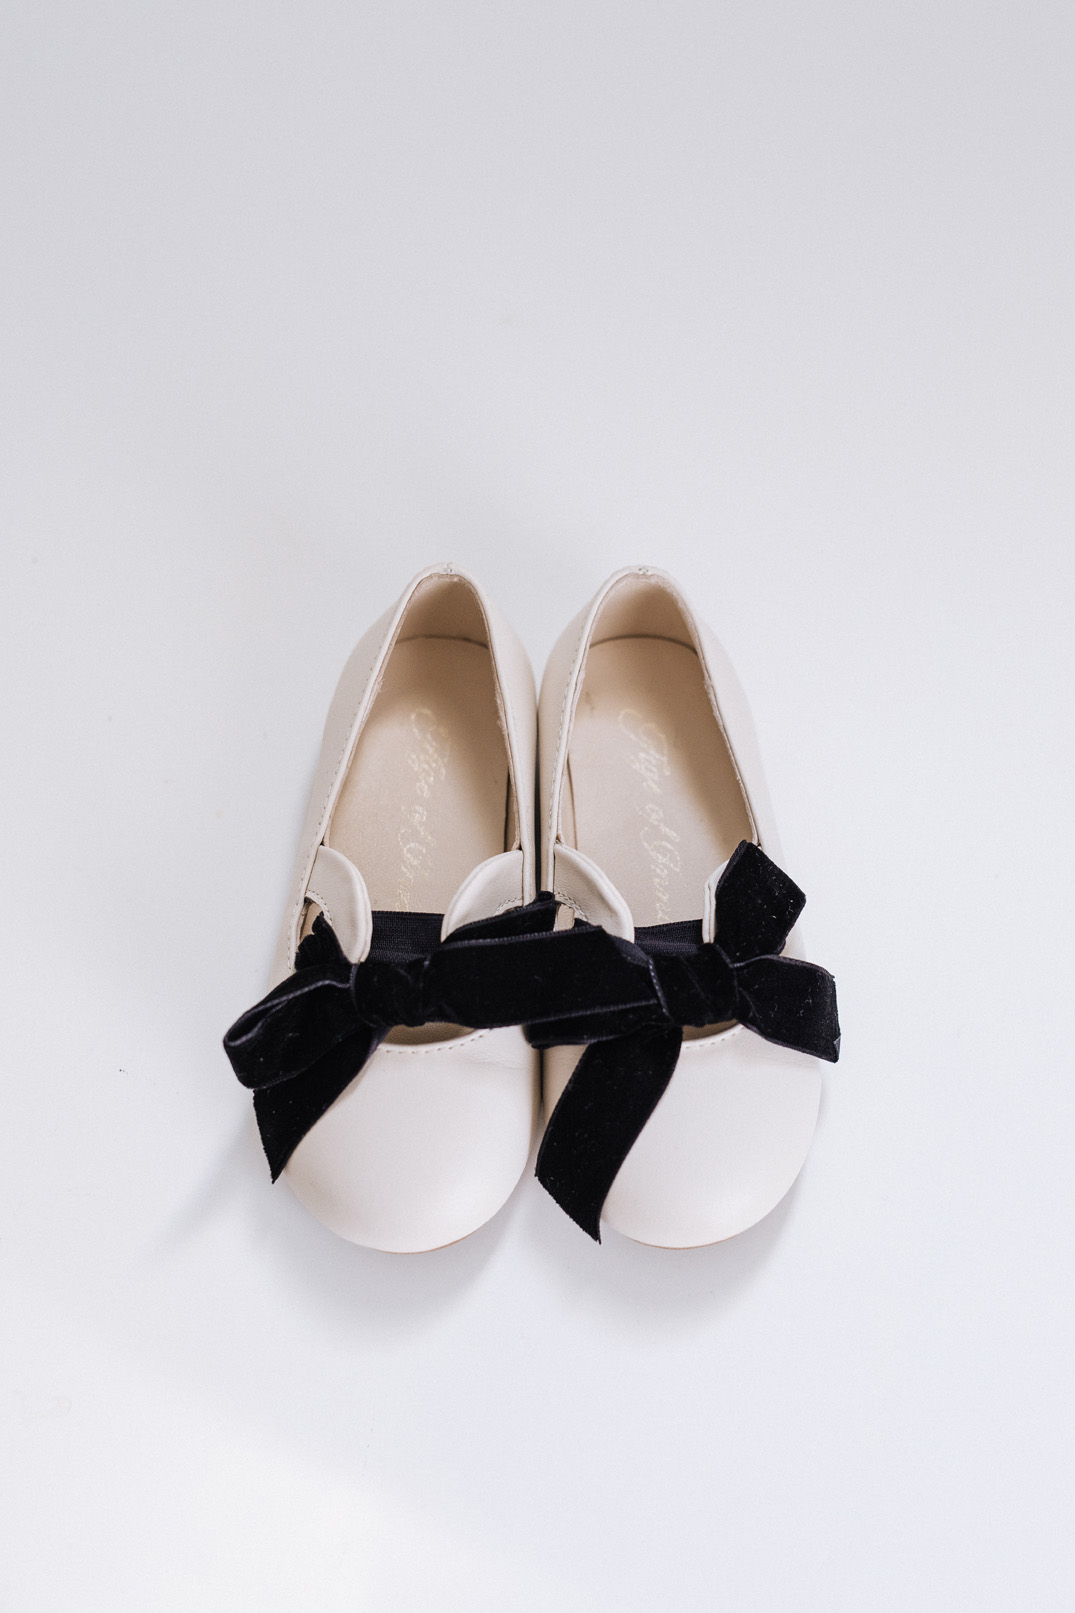 Matching shoes for the flower girl